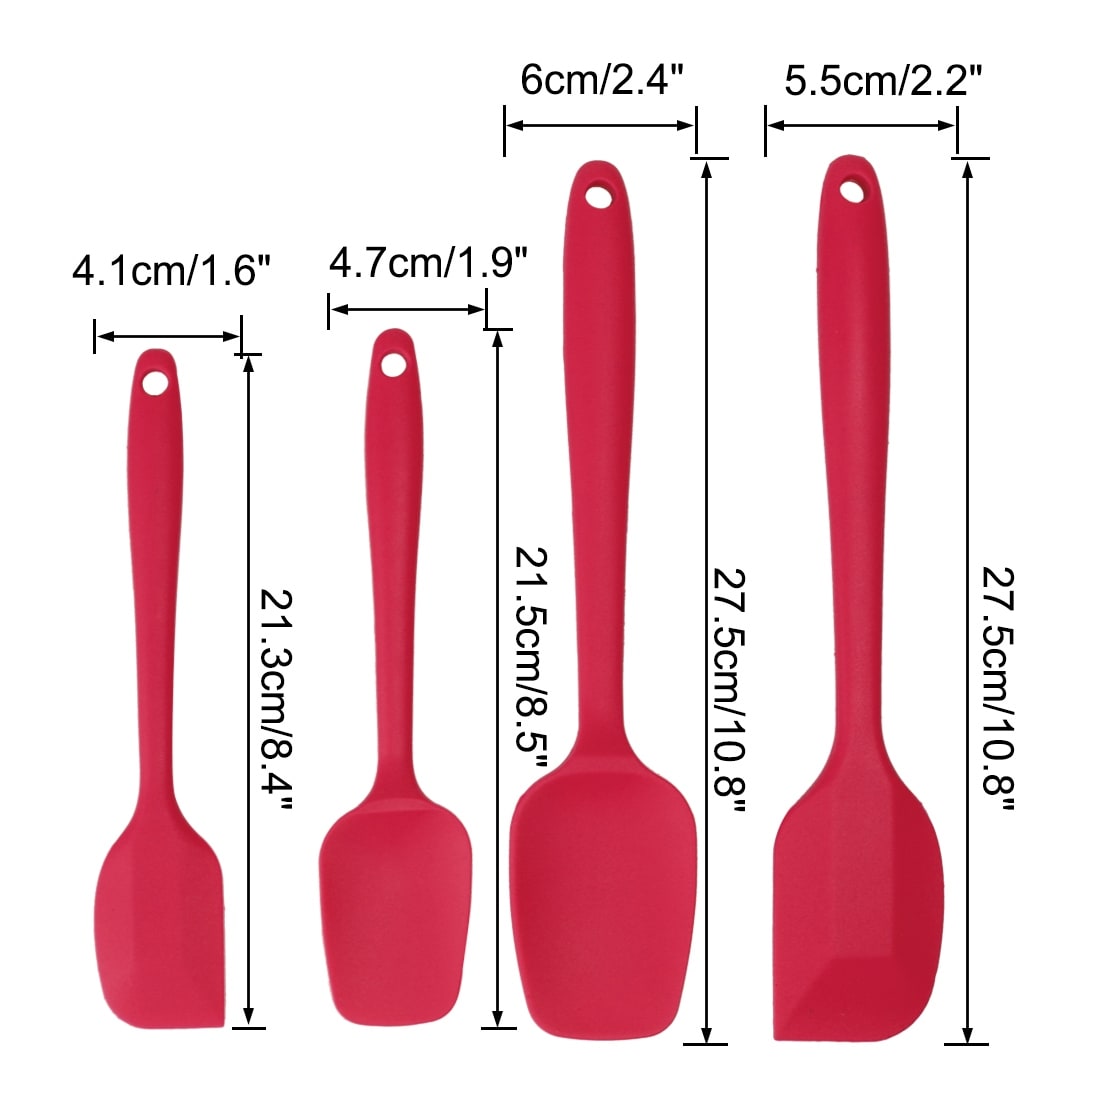 Baking Utensils, 17 Nylon Stainless Steel Baking Supplies Non Stick and Heat Resistant Bakeware Set New Baker's Gadget Tools Collection Great Silicone